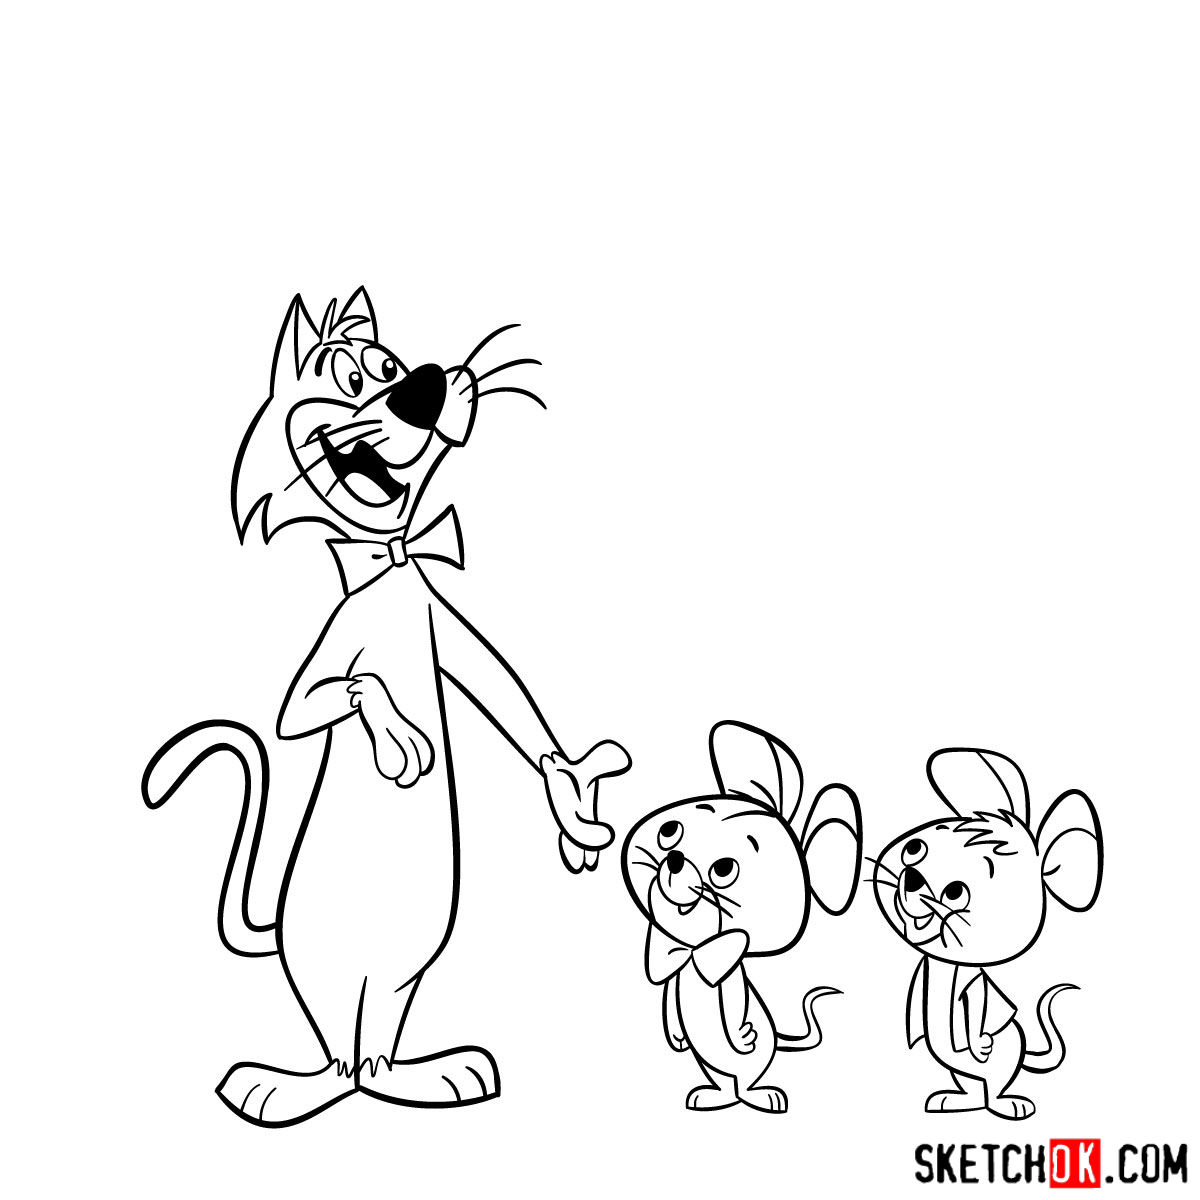 How to draw Pixie and Dixie and Mr. Jinks together - step 23